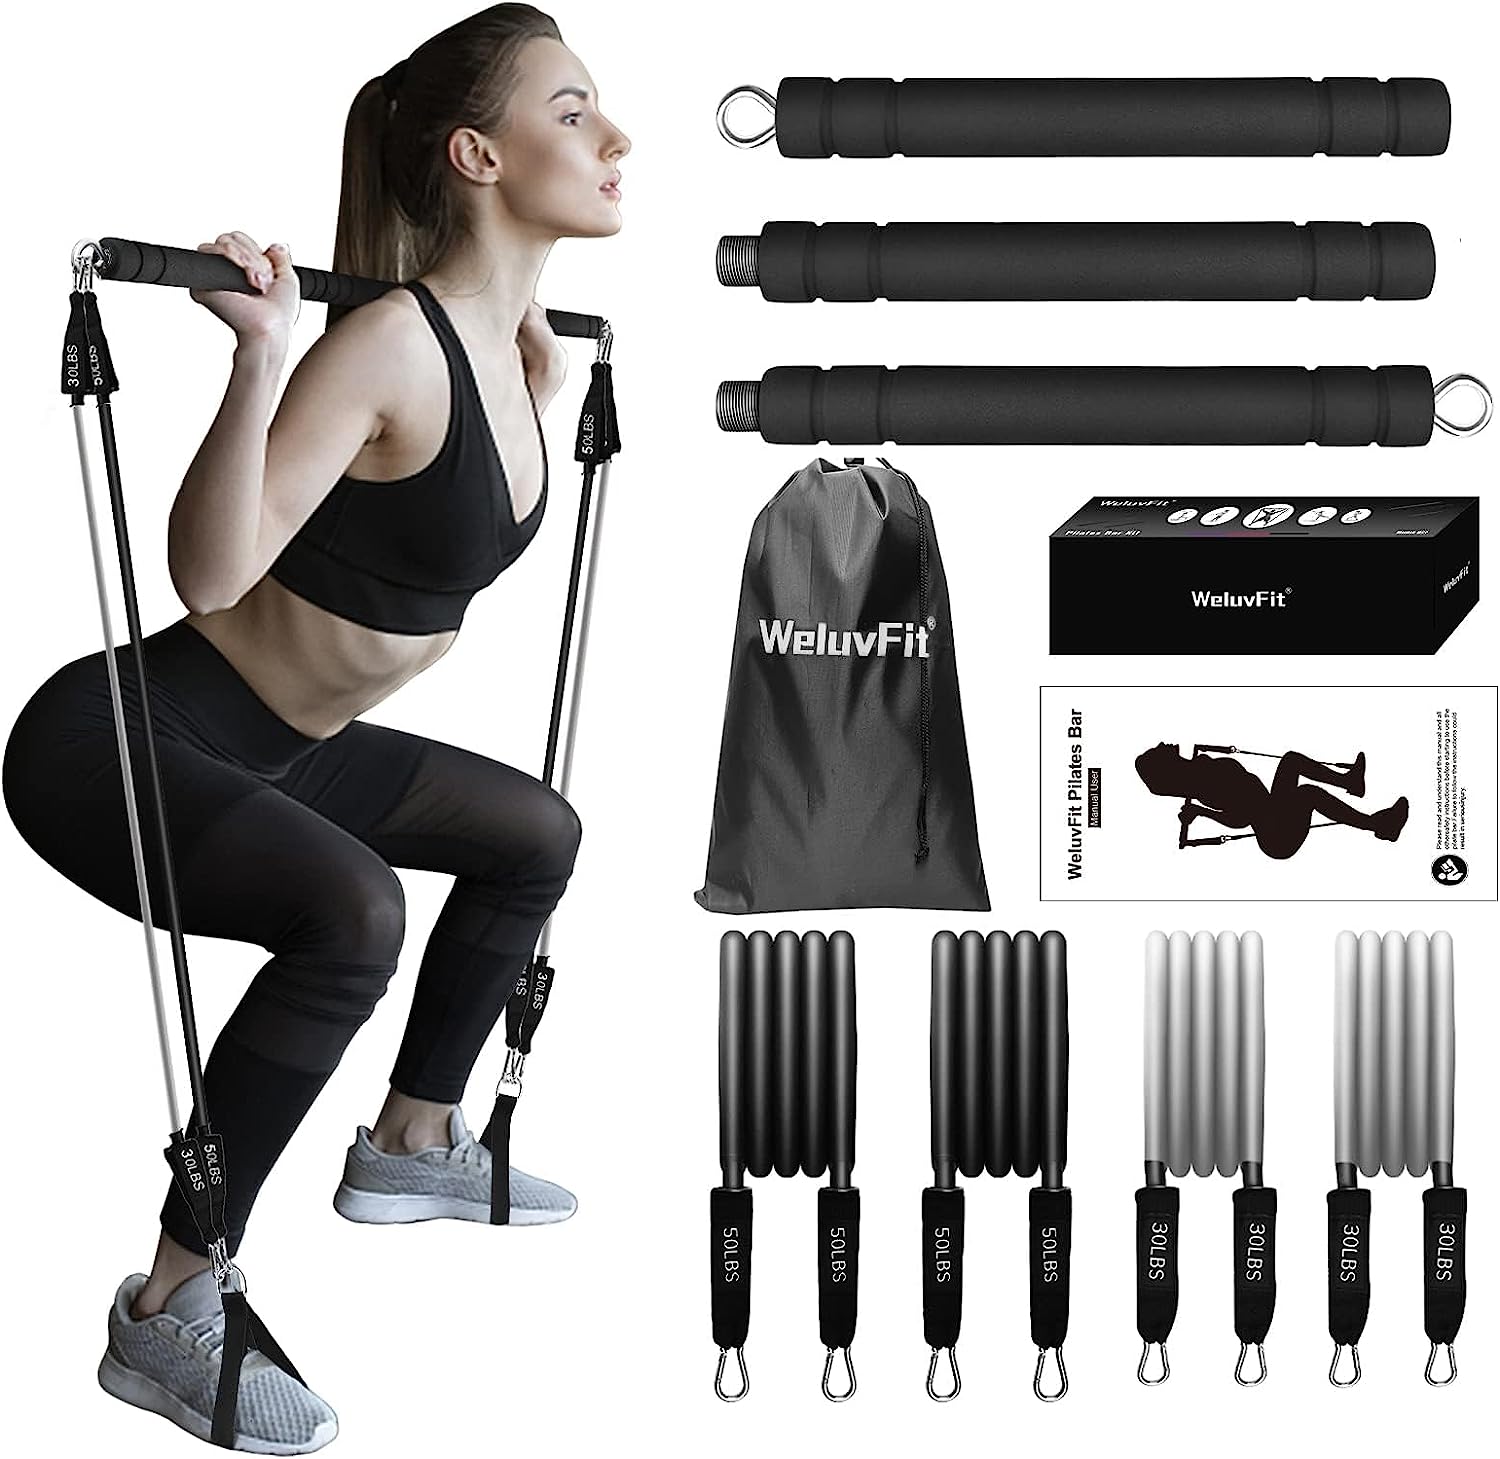 Pilates Bar Kit with Resistance Bands - WeluvFit Exercise Fitness Equipment for Women and Men